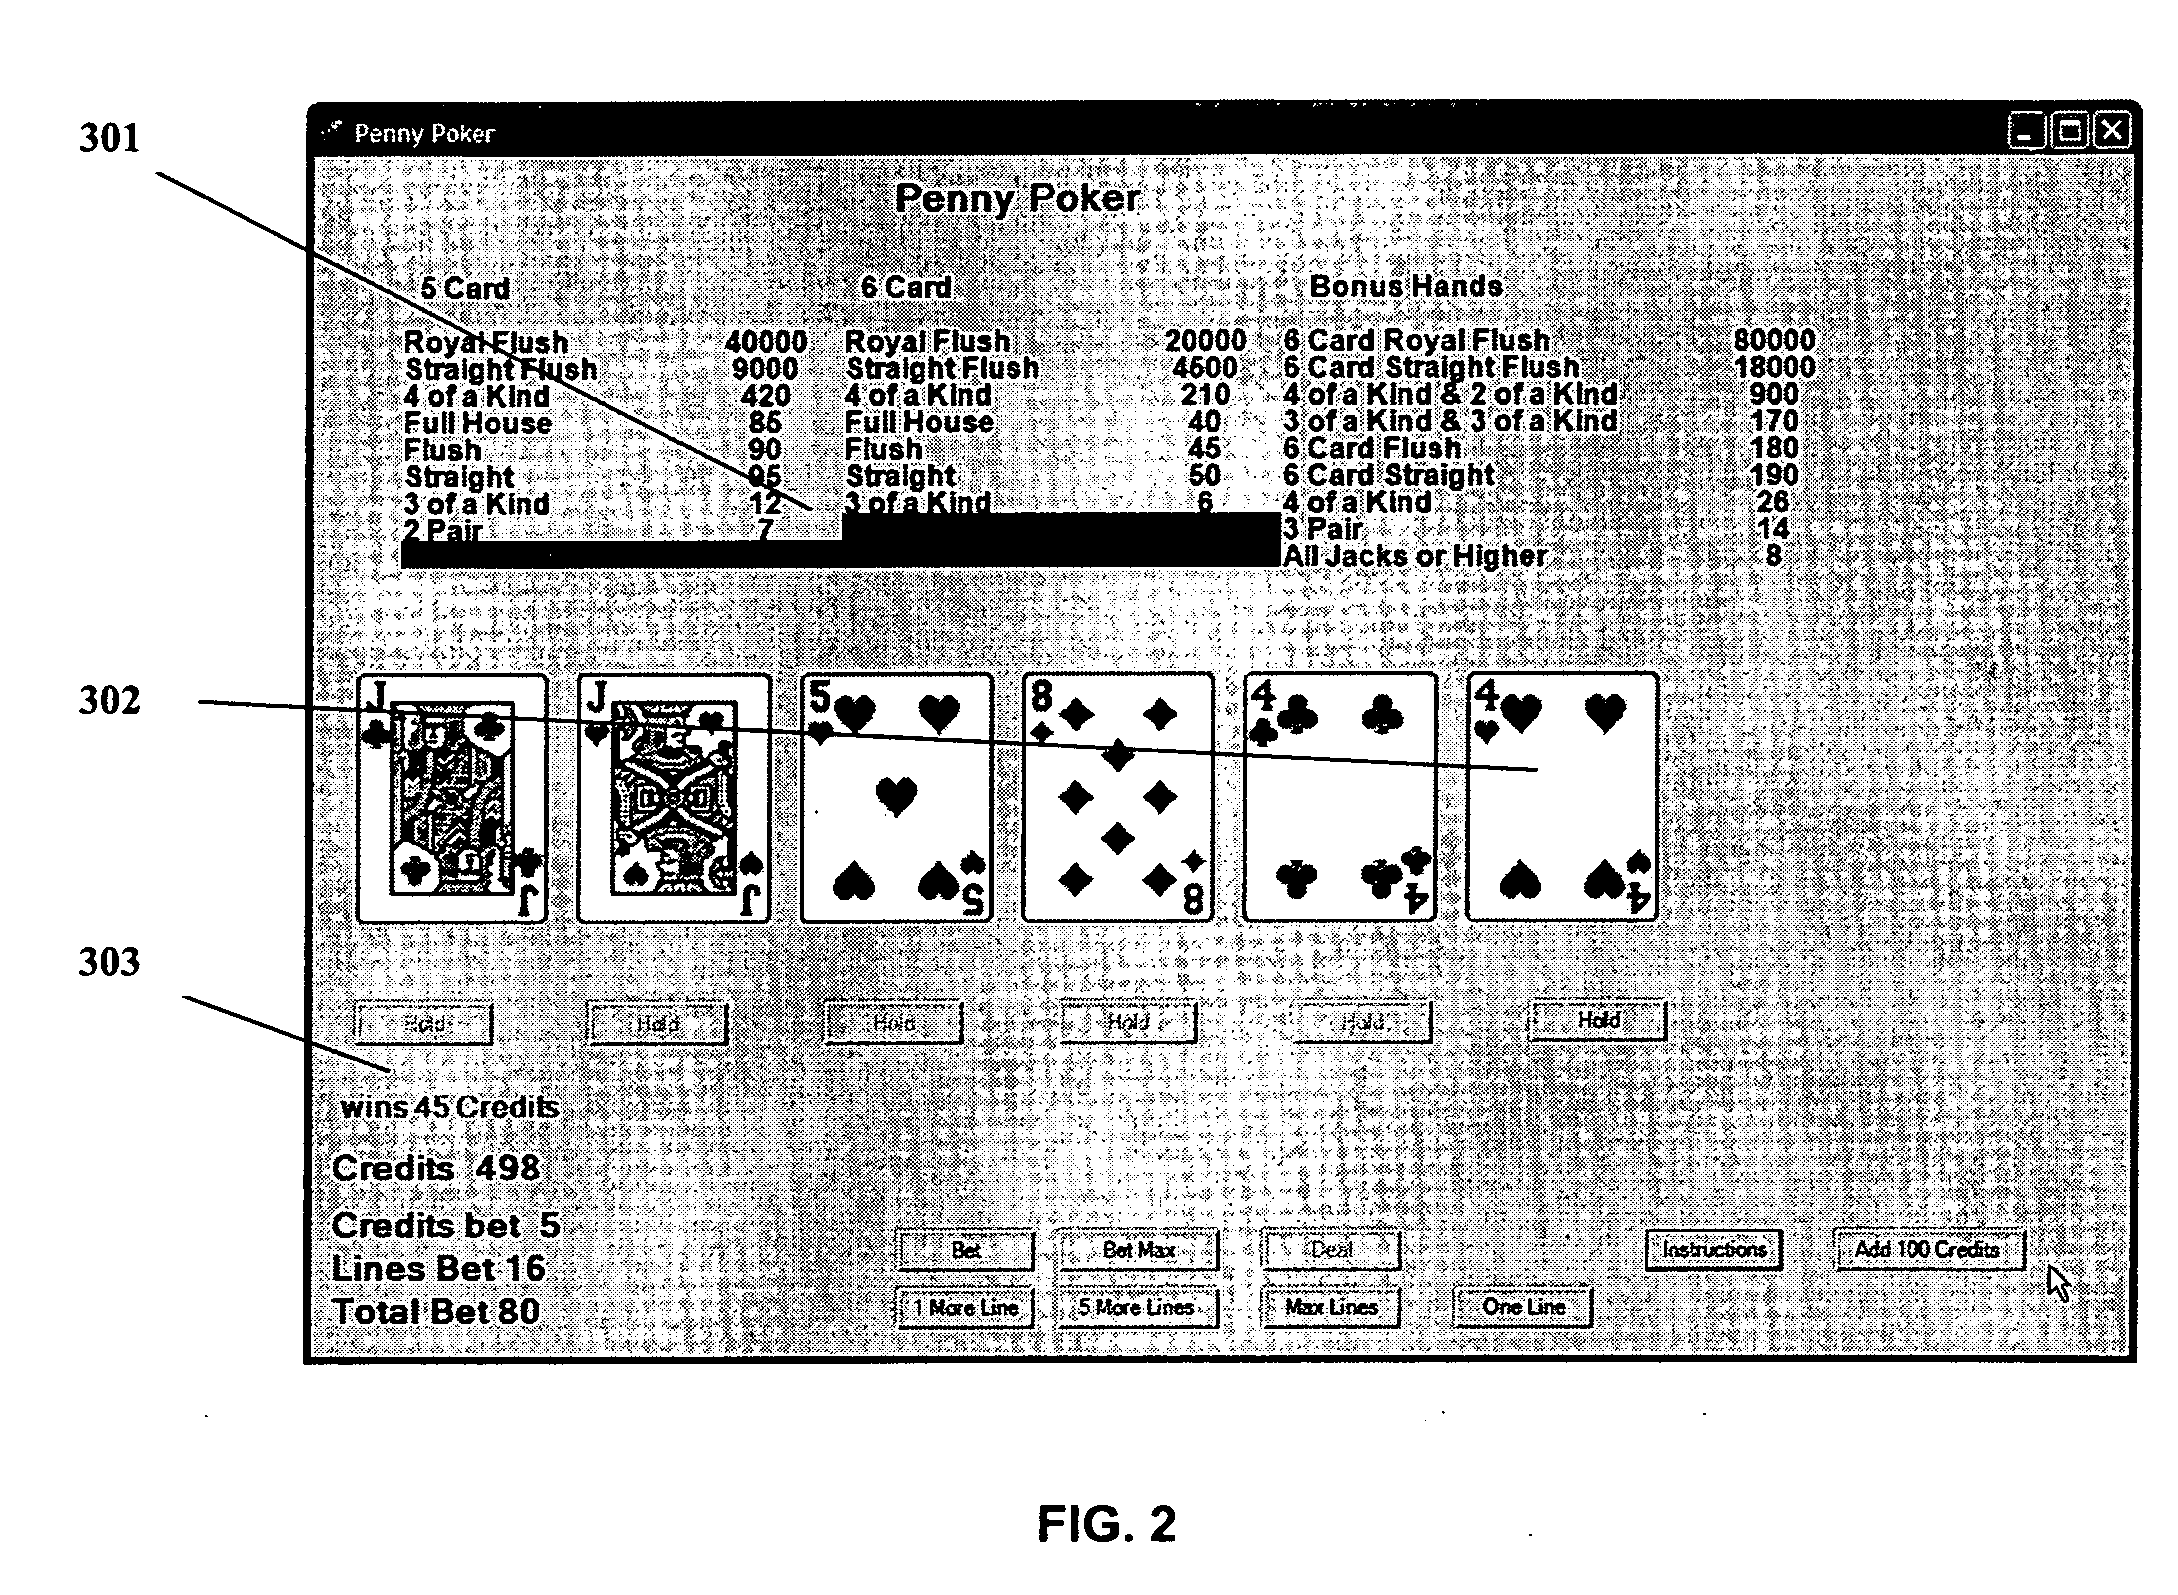 Method for multi-line betting on a video poker game